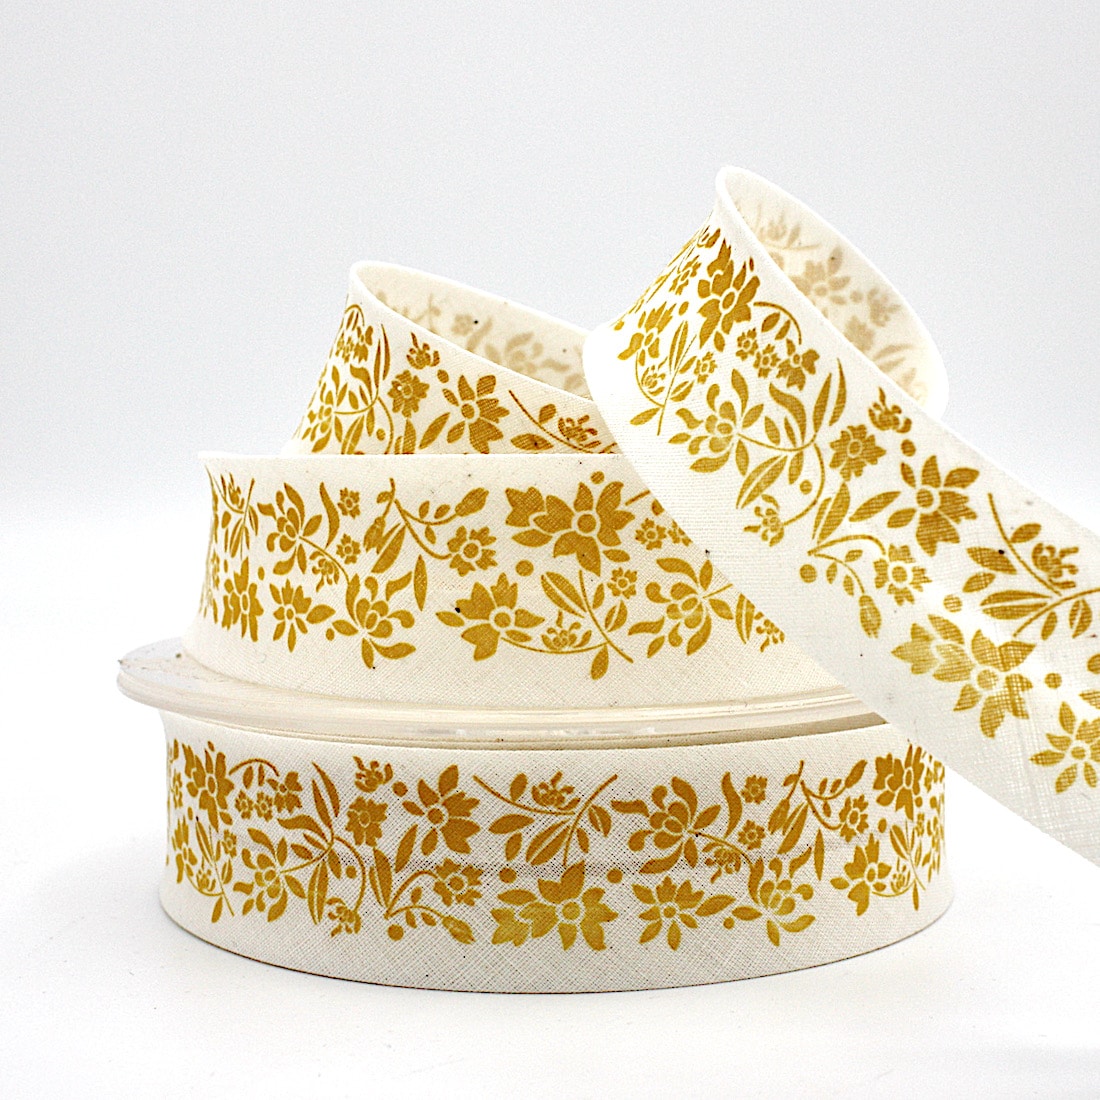 25m roll of Floral Trail Special Print Bias Binding Tape with 30mm width in Yellow